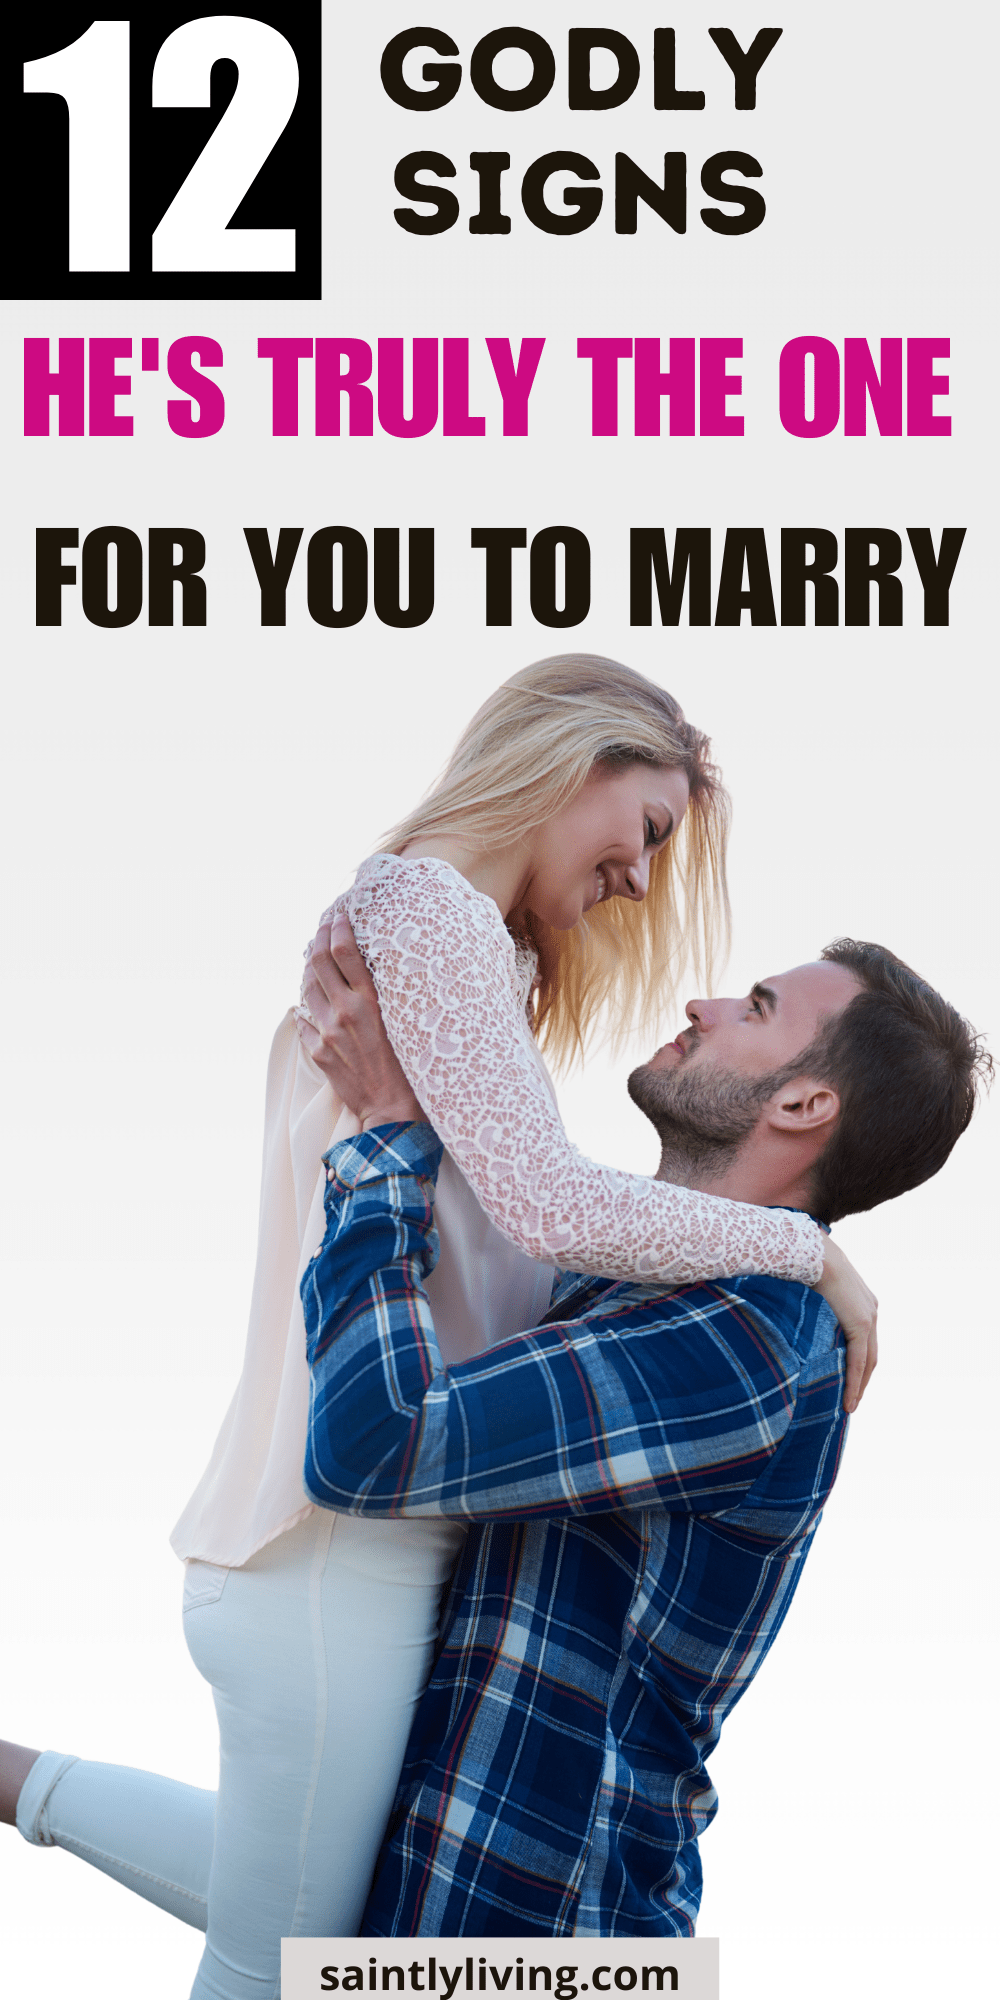 12 signs he's truly the one for you to marry.